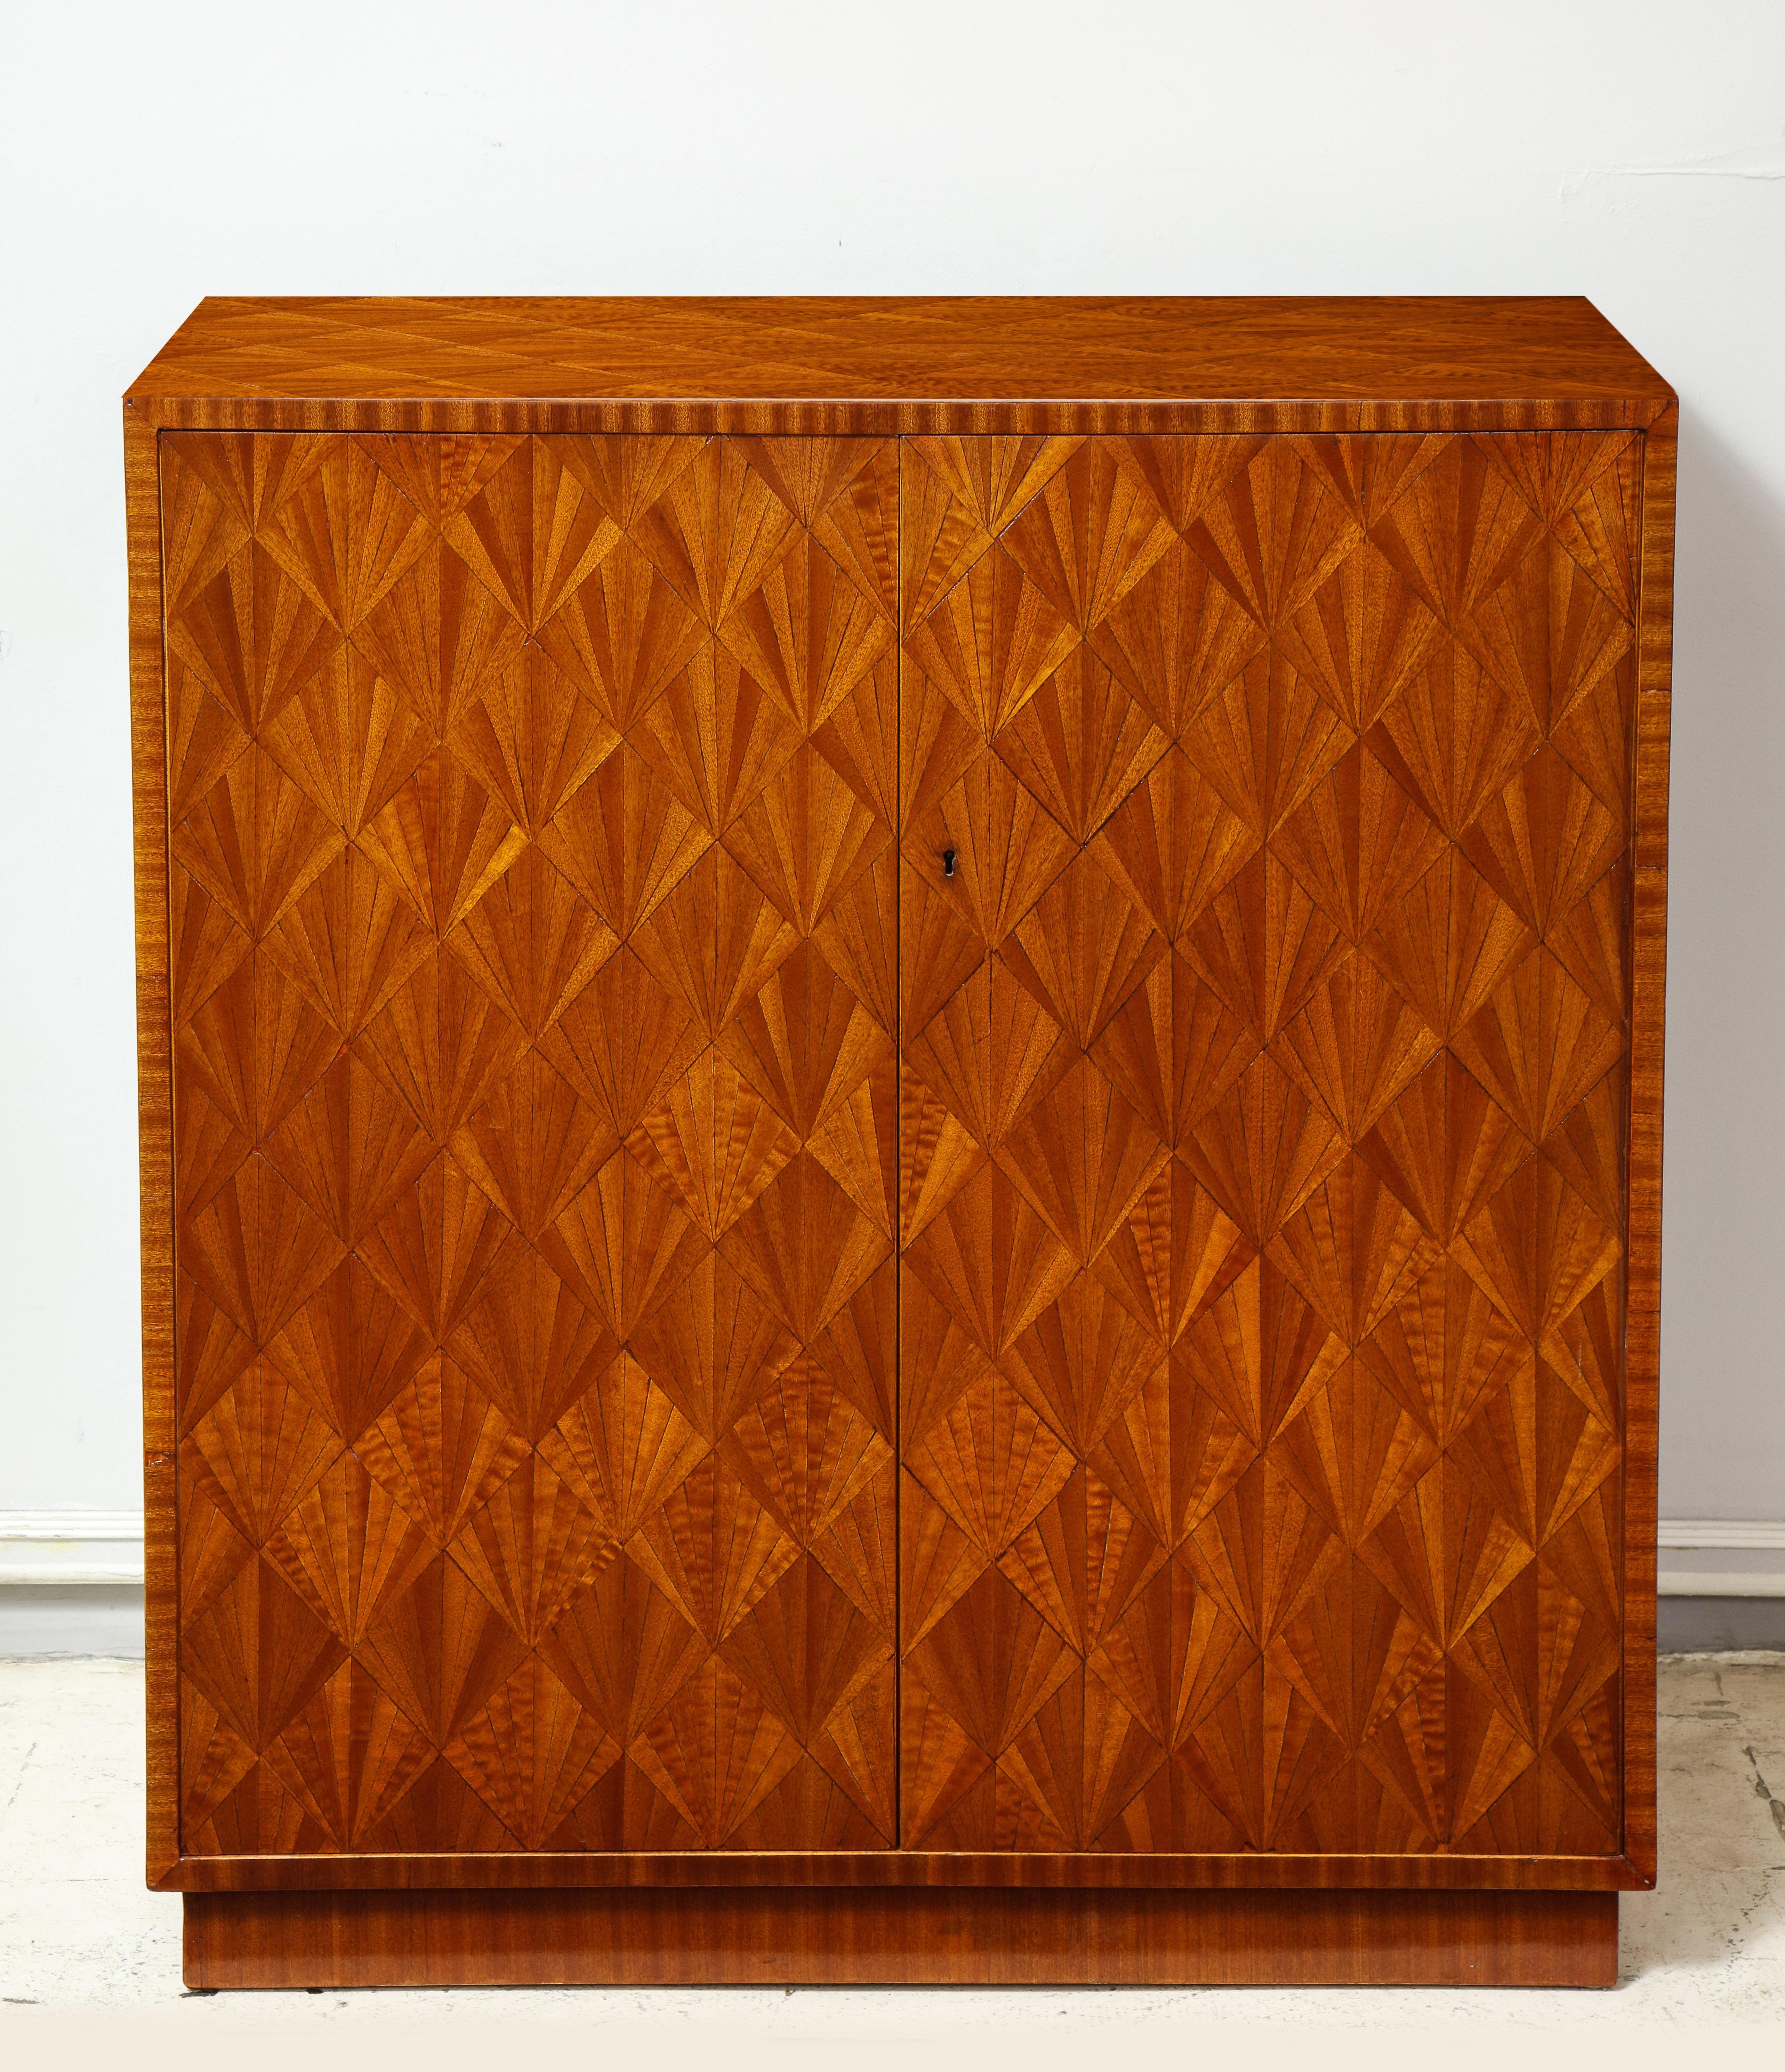 Exquisite Parquetry sycamore cabinet in the Jean-Michel Frank manner, parquetry work emulates straw marquetry found in French Art Deco design.

Measures: H 38.5 in. x W 35.5 in. x D 15 in.